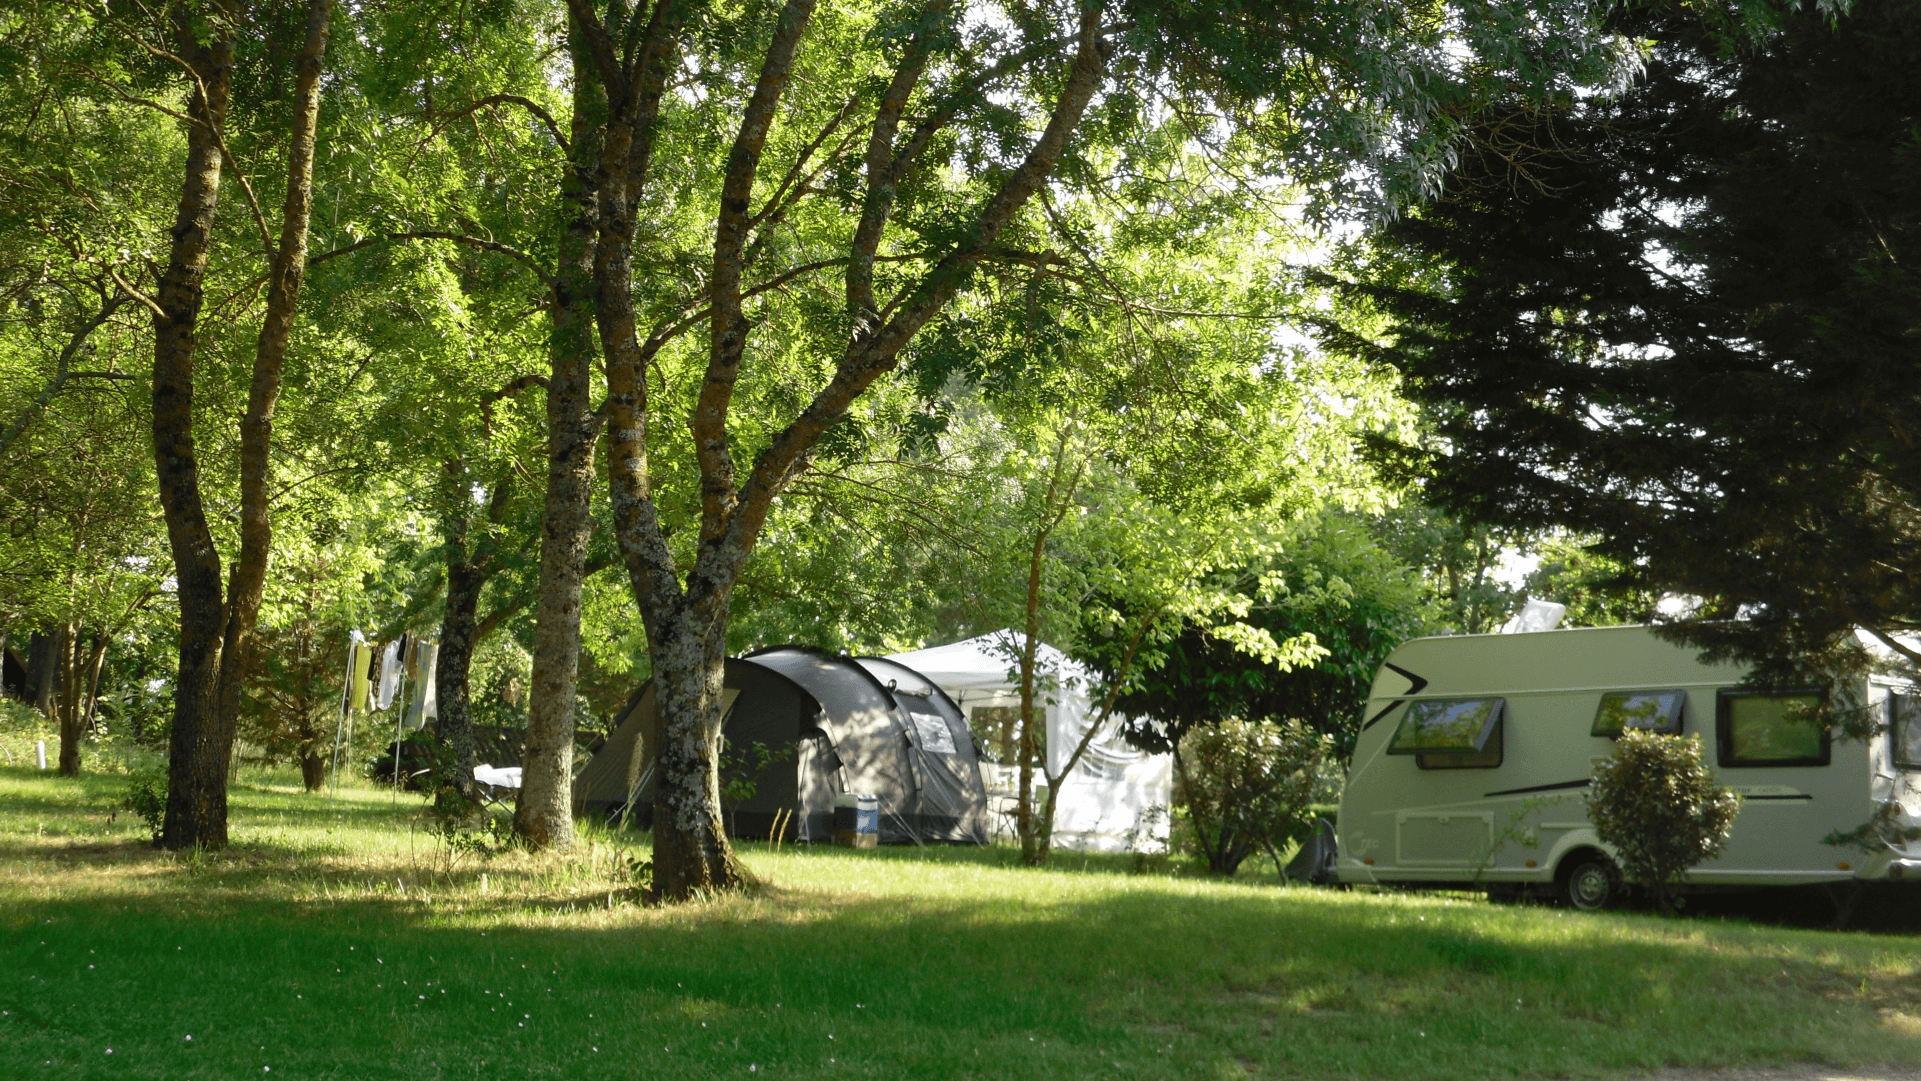 Camping Flower La Pibola pitches at Camon in Ariège, Occitanie, tent, caravan and motorhome pitches